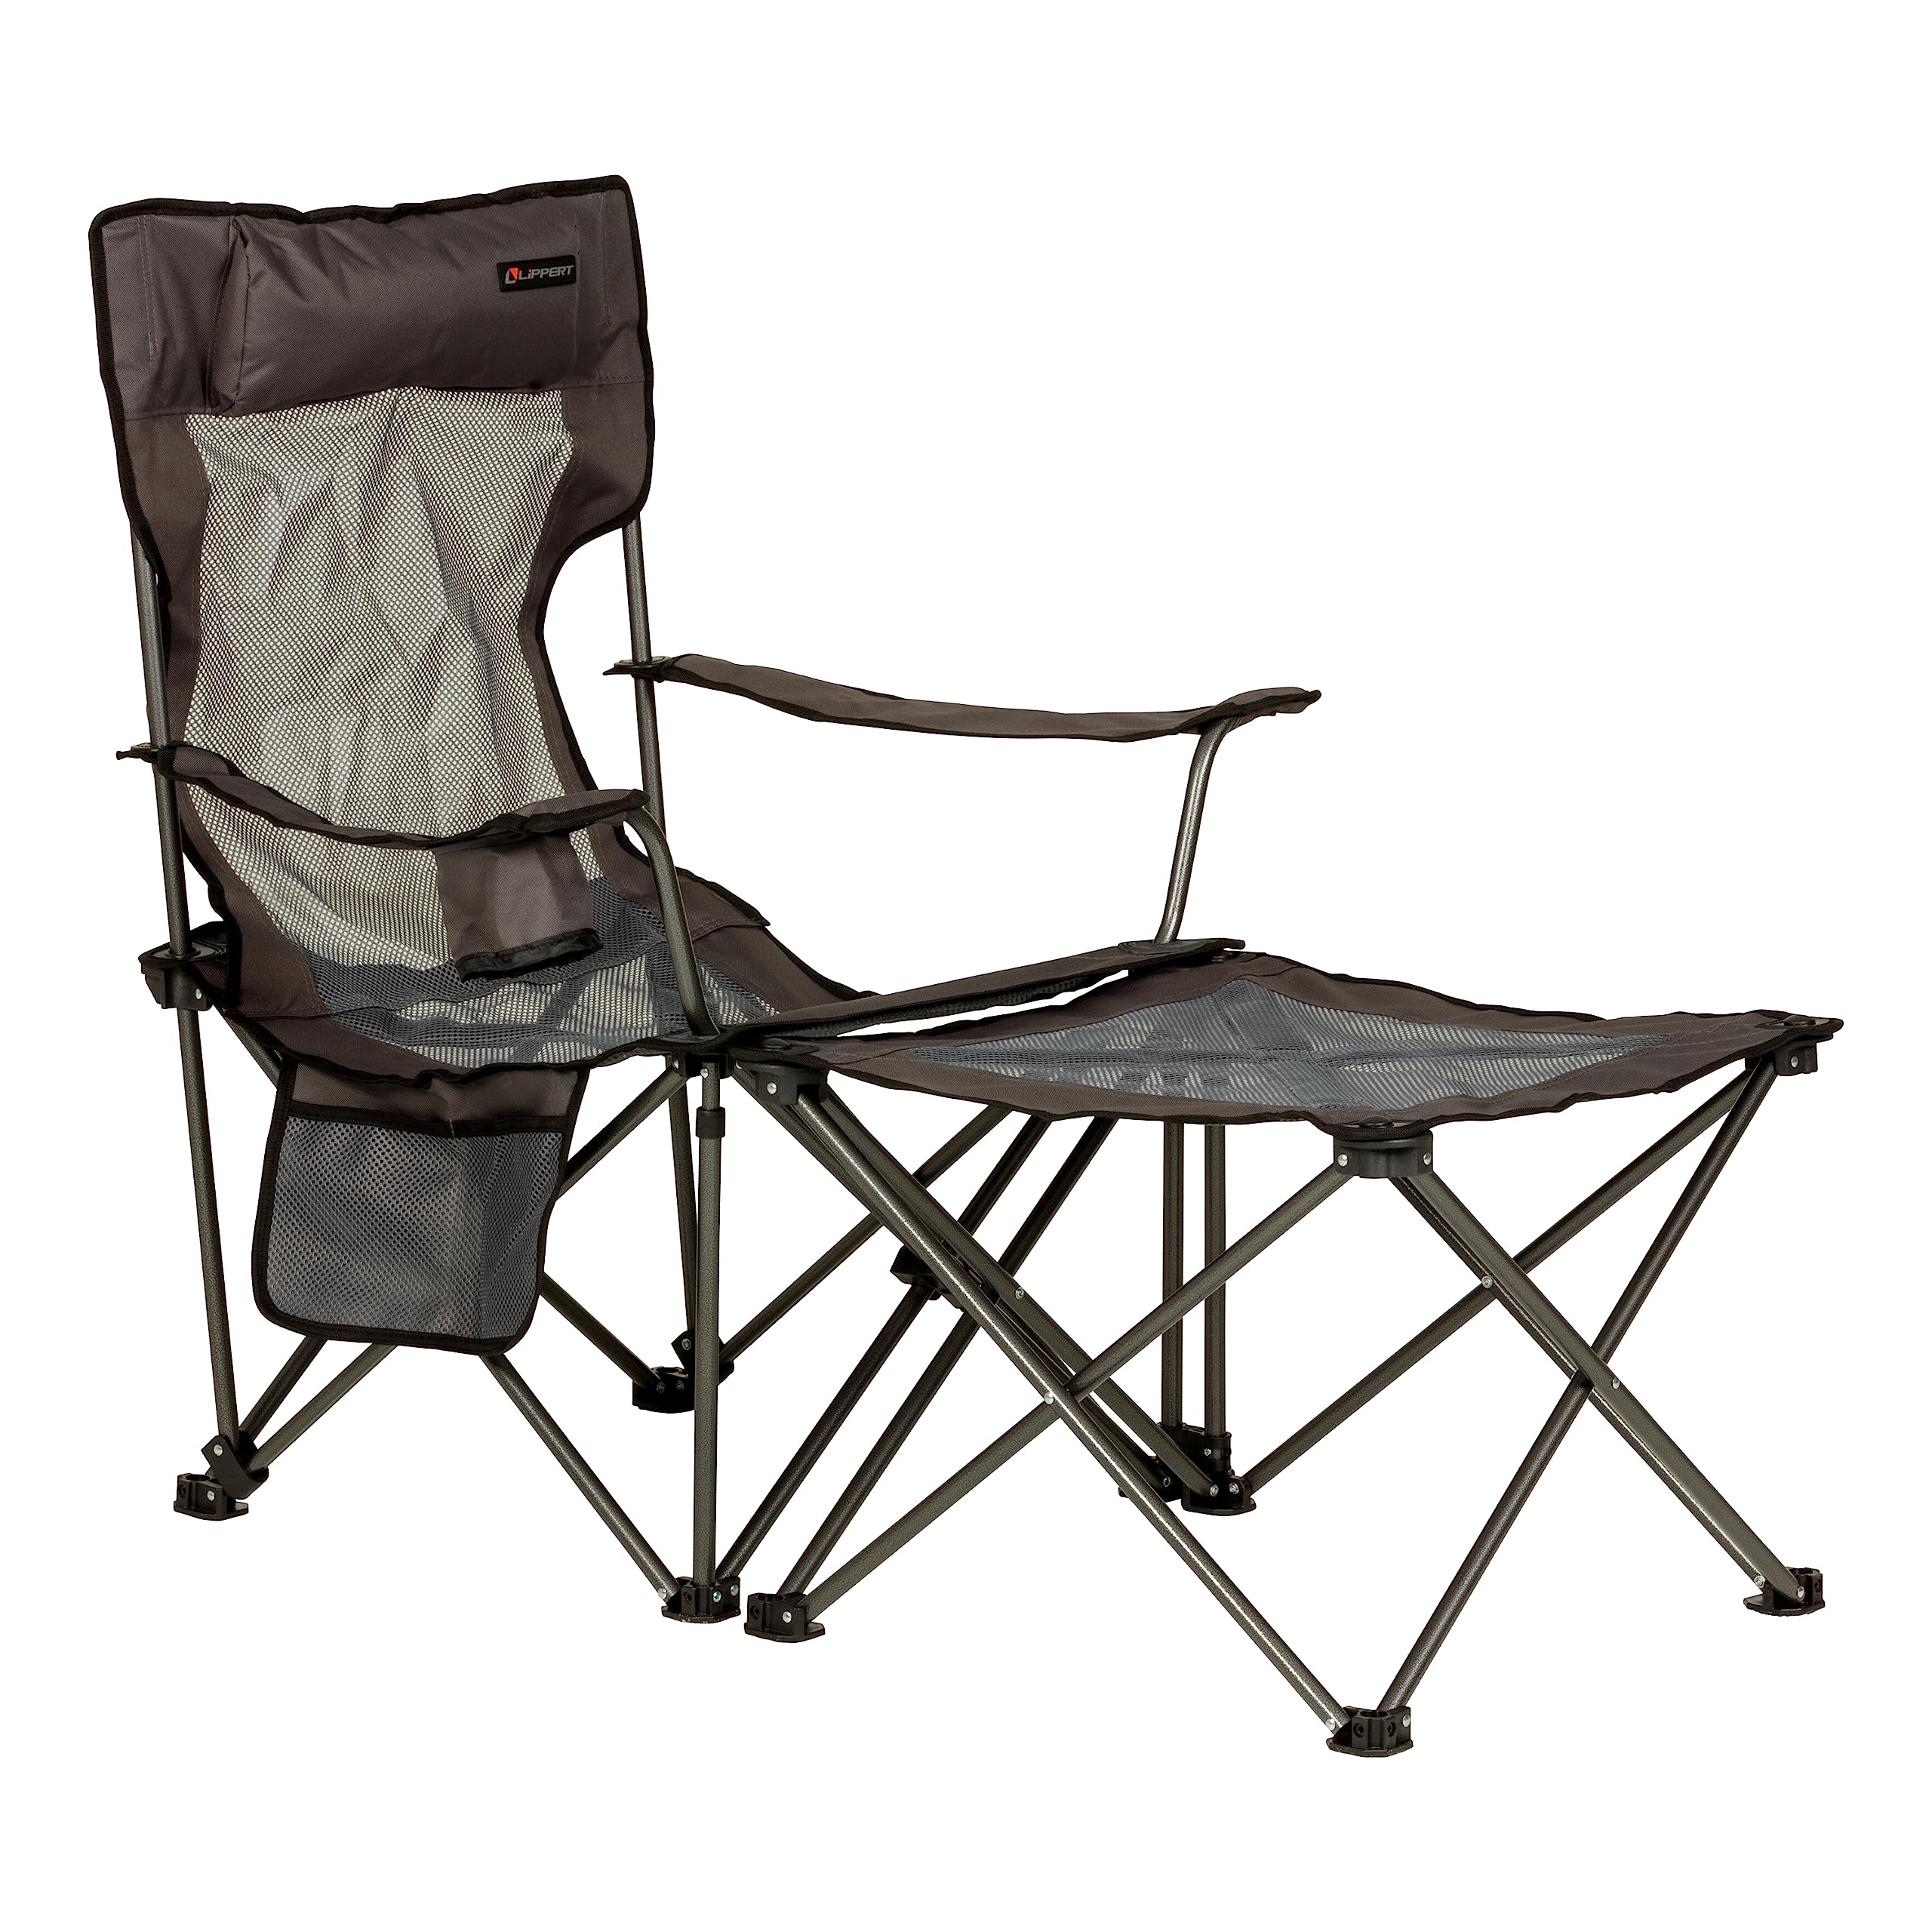 CAMPFIRE 2 POSITION PADDED RECLINER WITH OTTOMAN DARK GREY